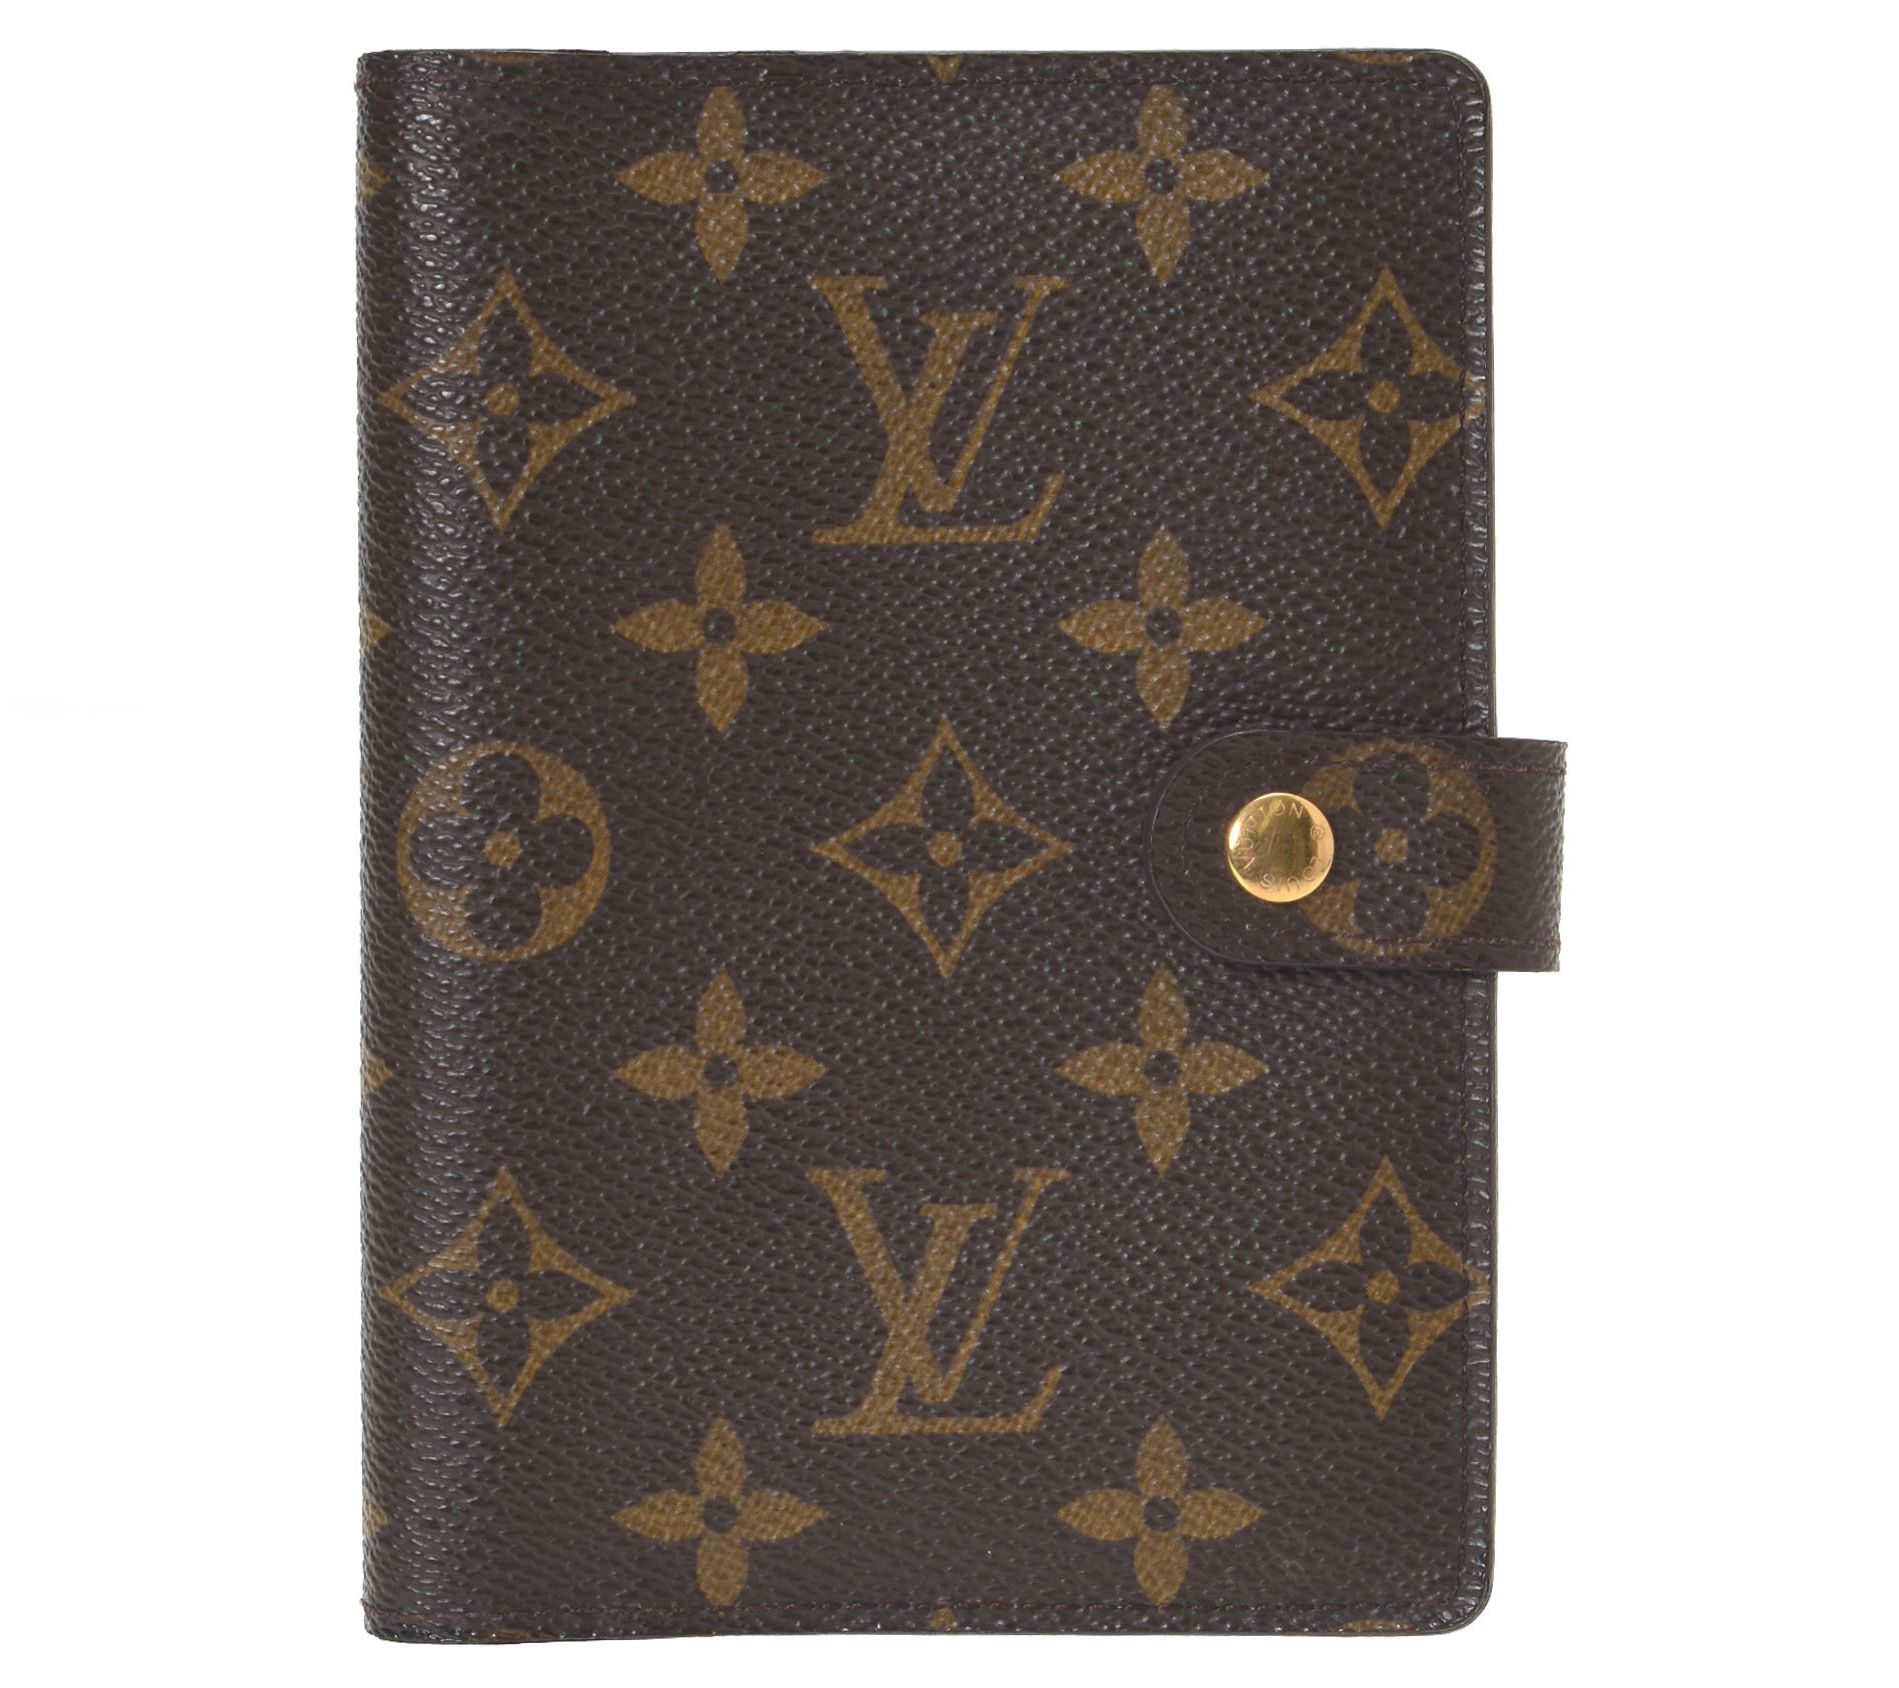 Pre-Owned Louis Vuitton Small Ring Agenda Cover - 2305ST36 